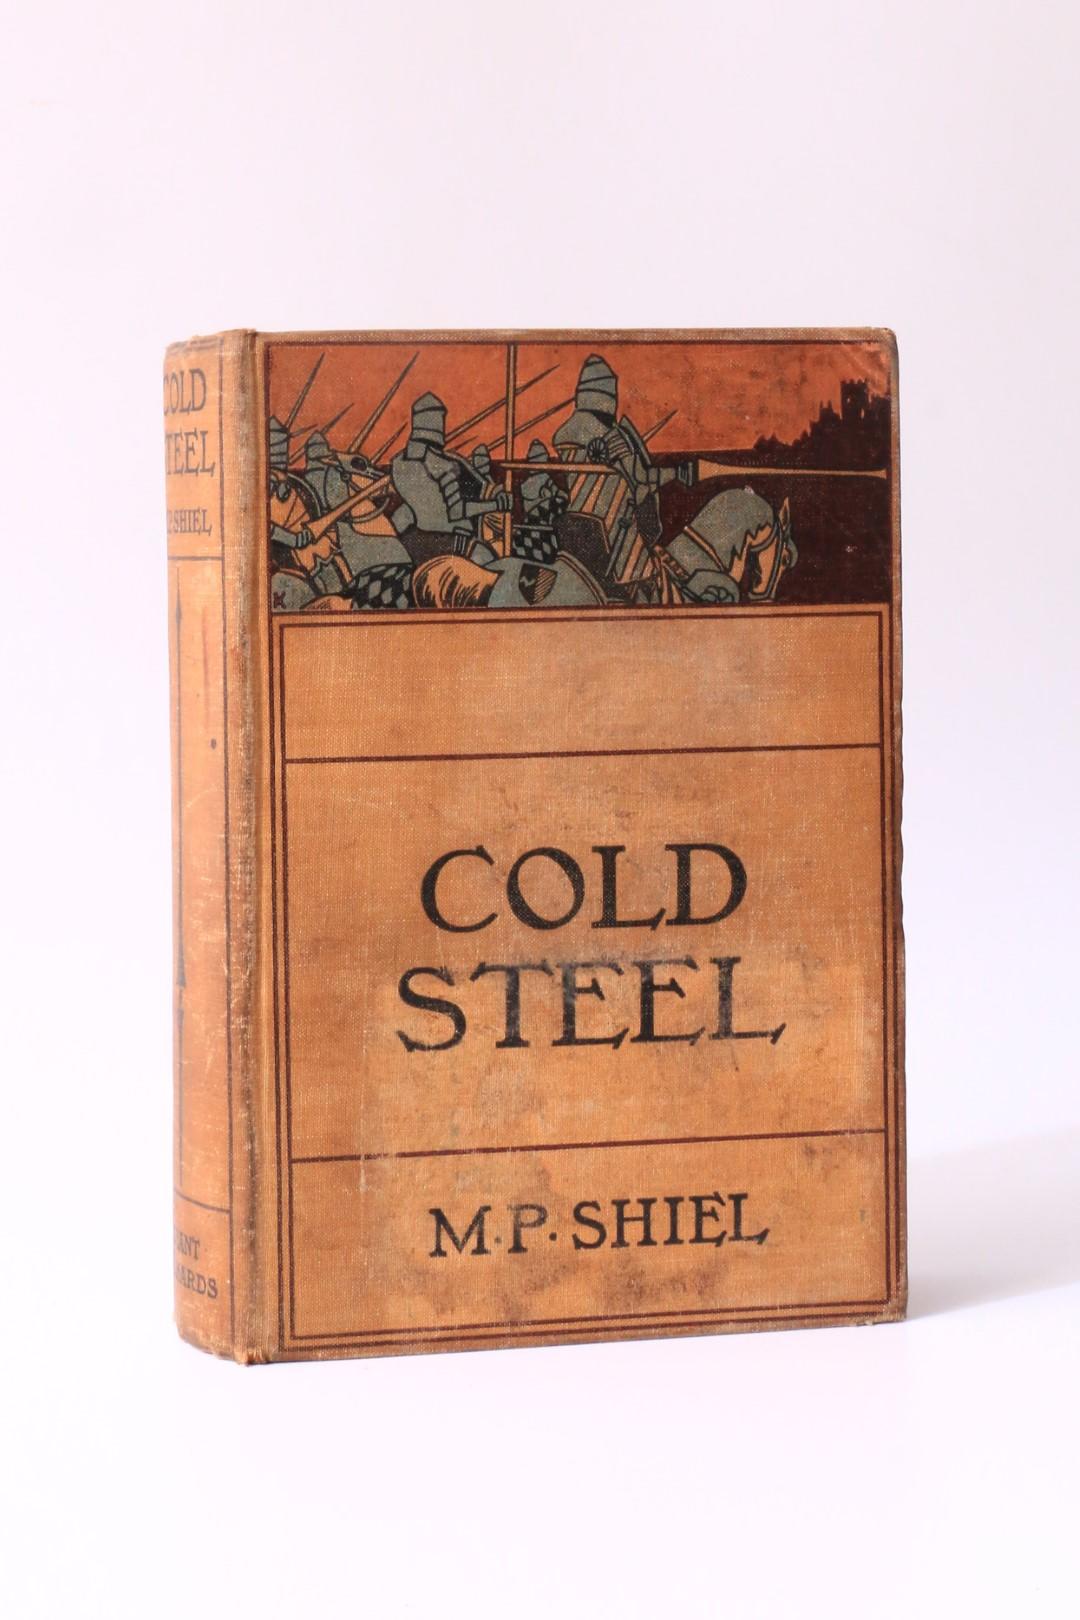 M.P. Shiel - Cold Steel - Grant Richards, 1899, First Edition.